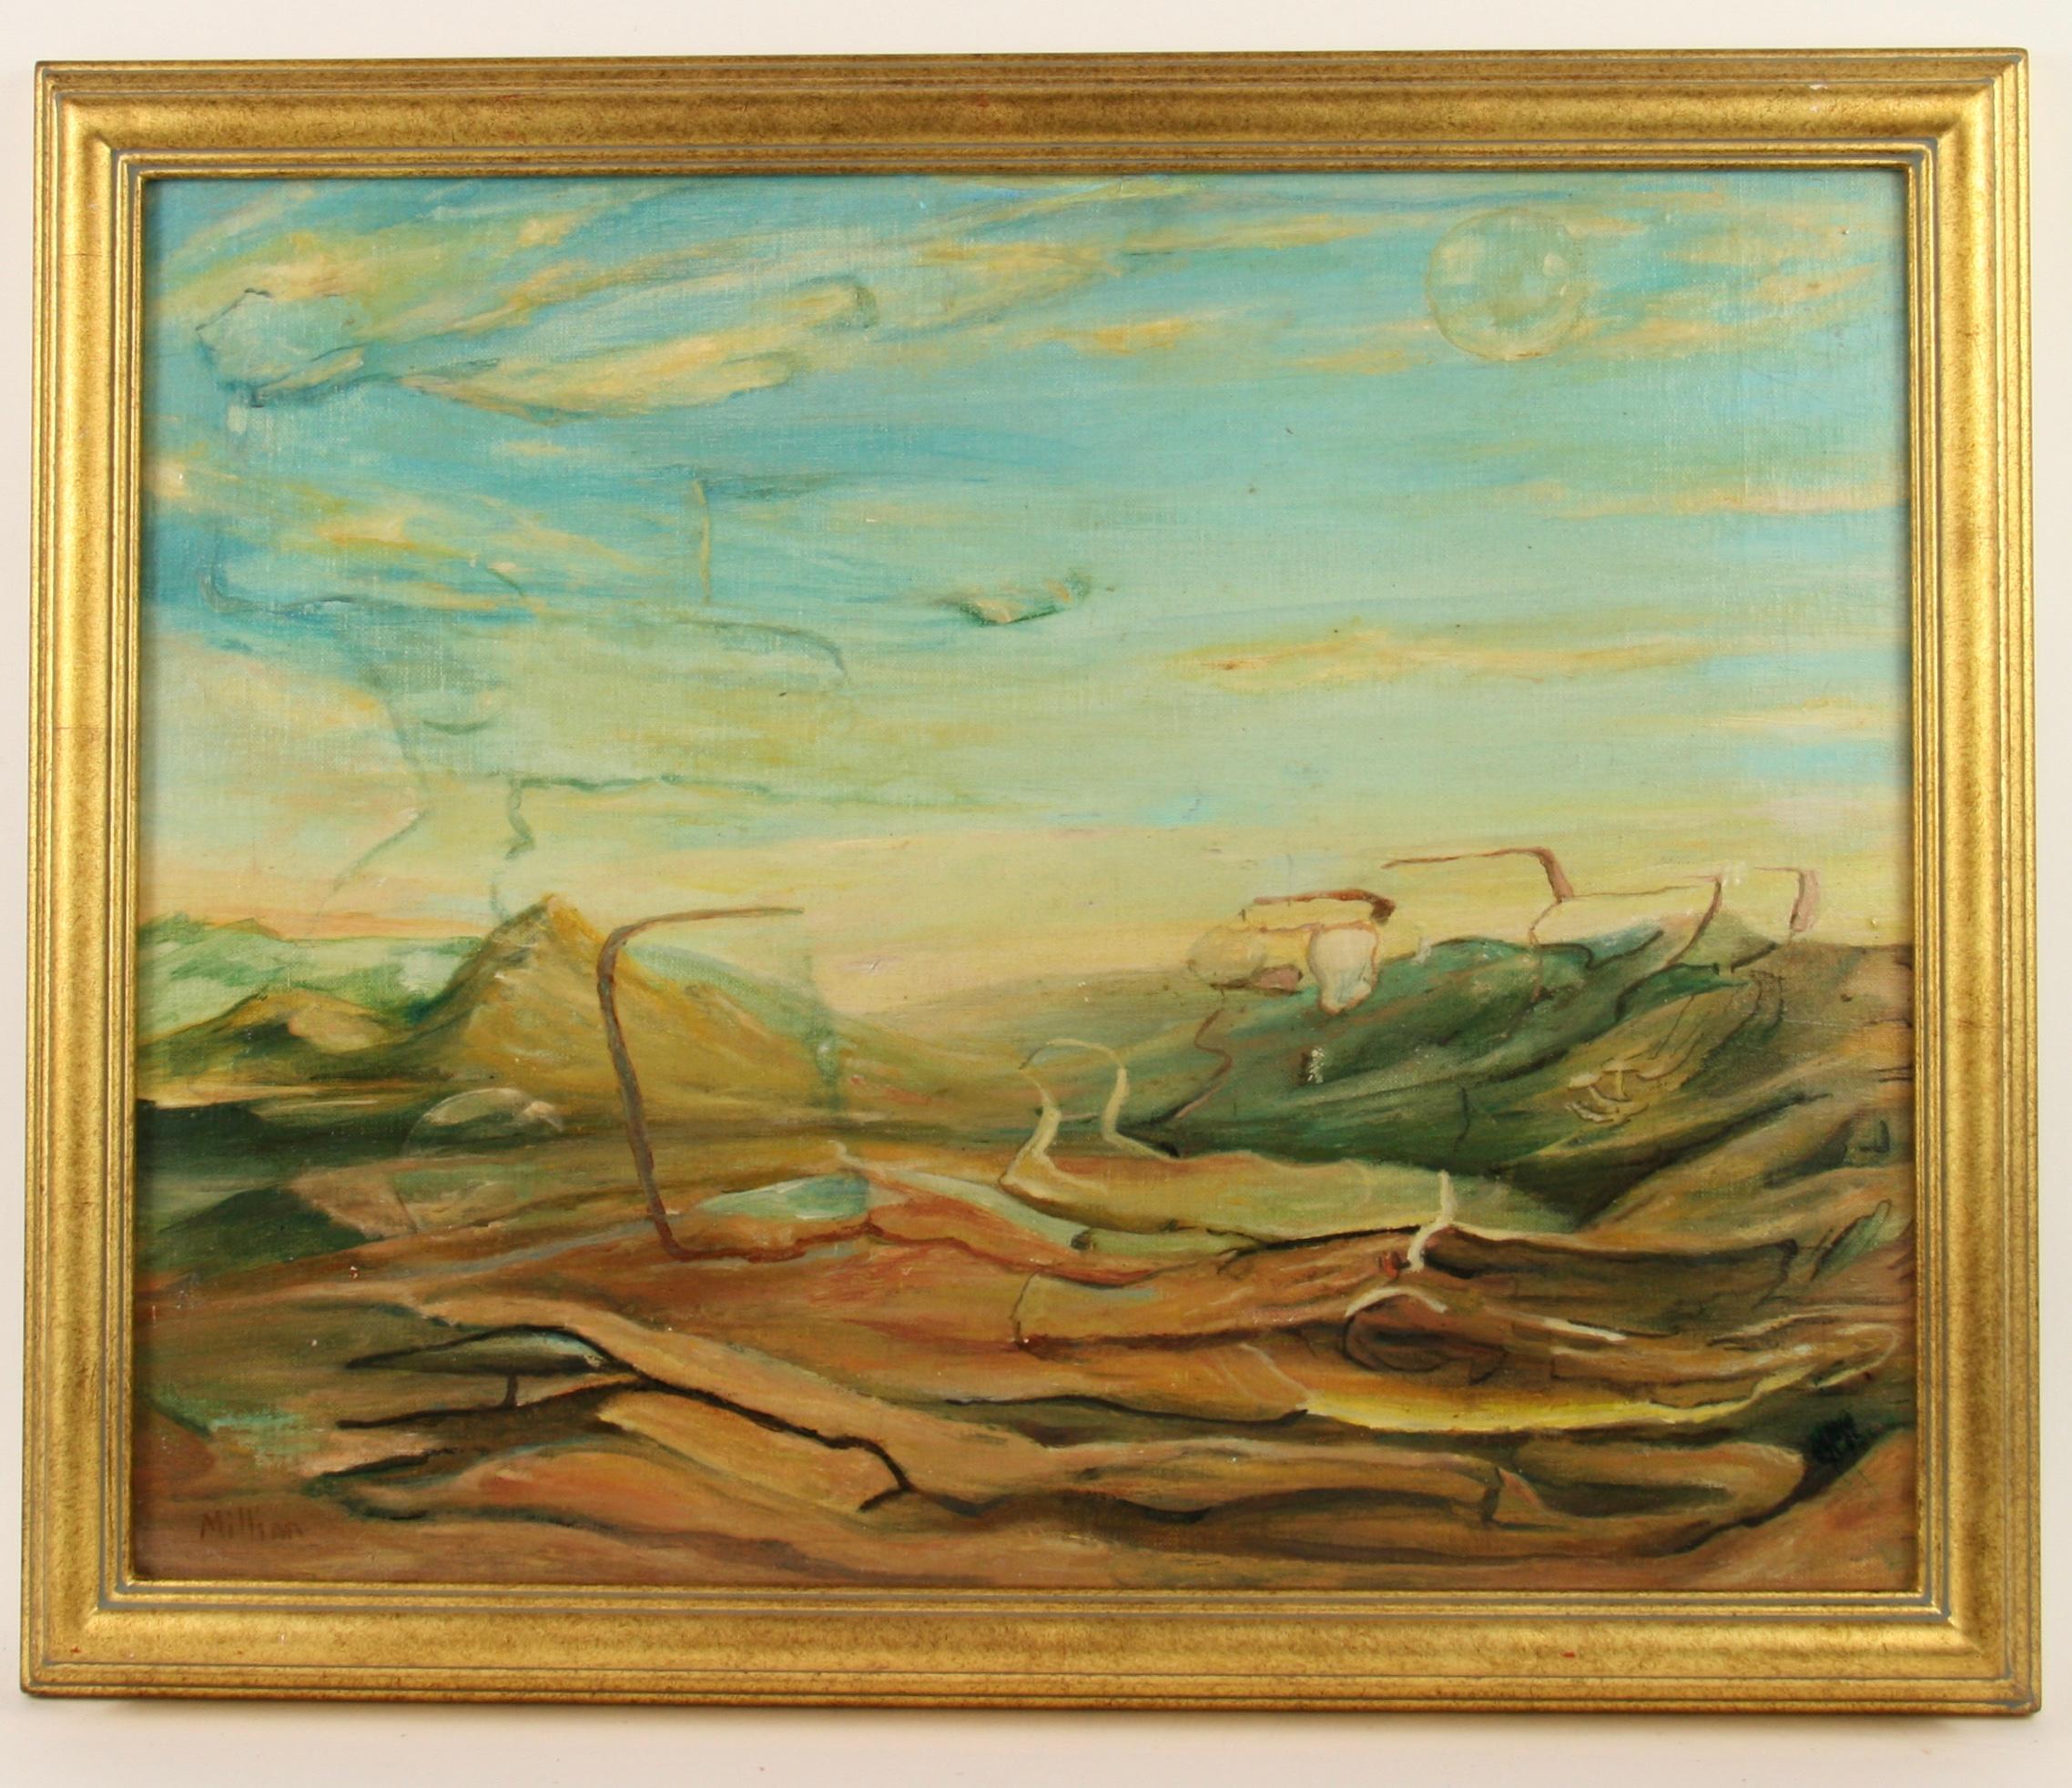 Unknown Abstract Painting - Antique Surreal  Landscape oil Painting  1930 signed Millian